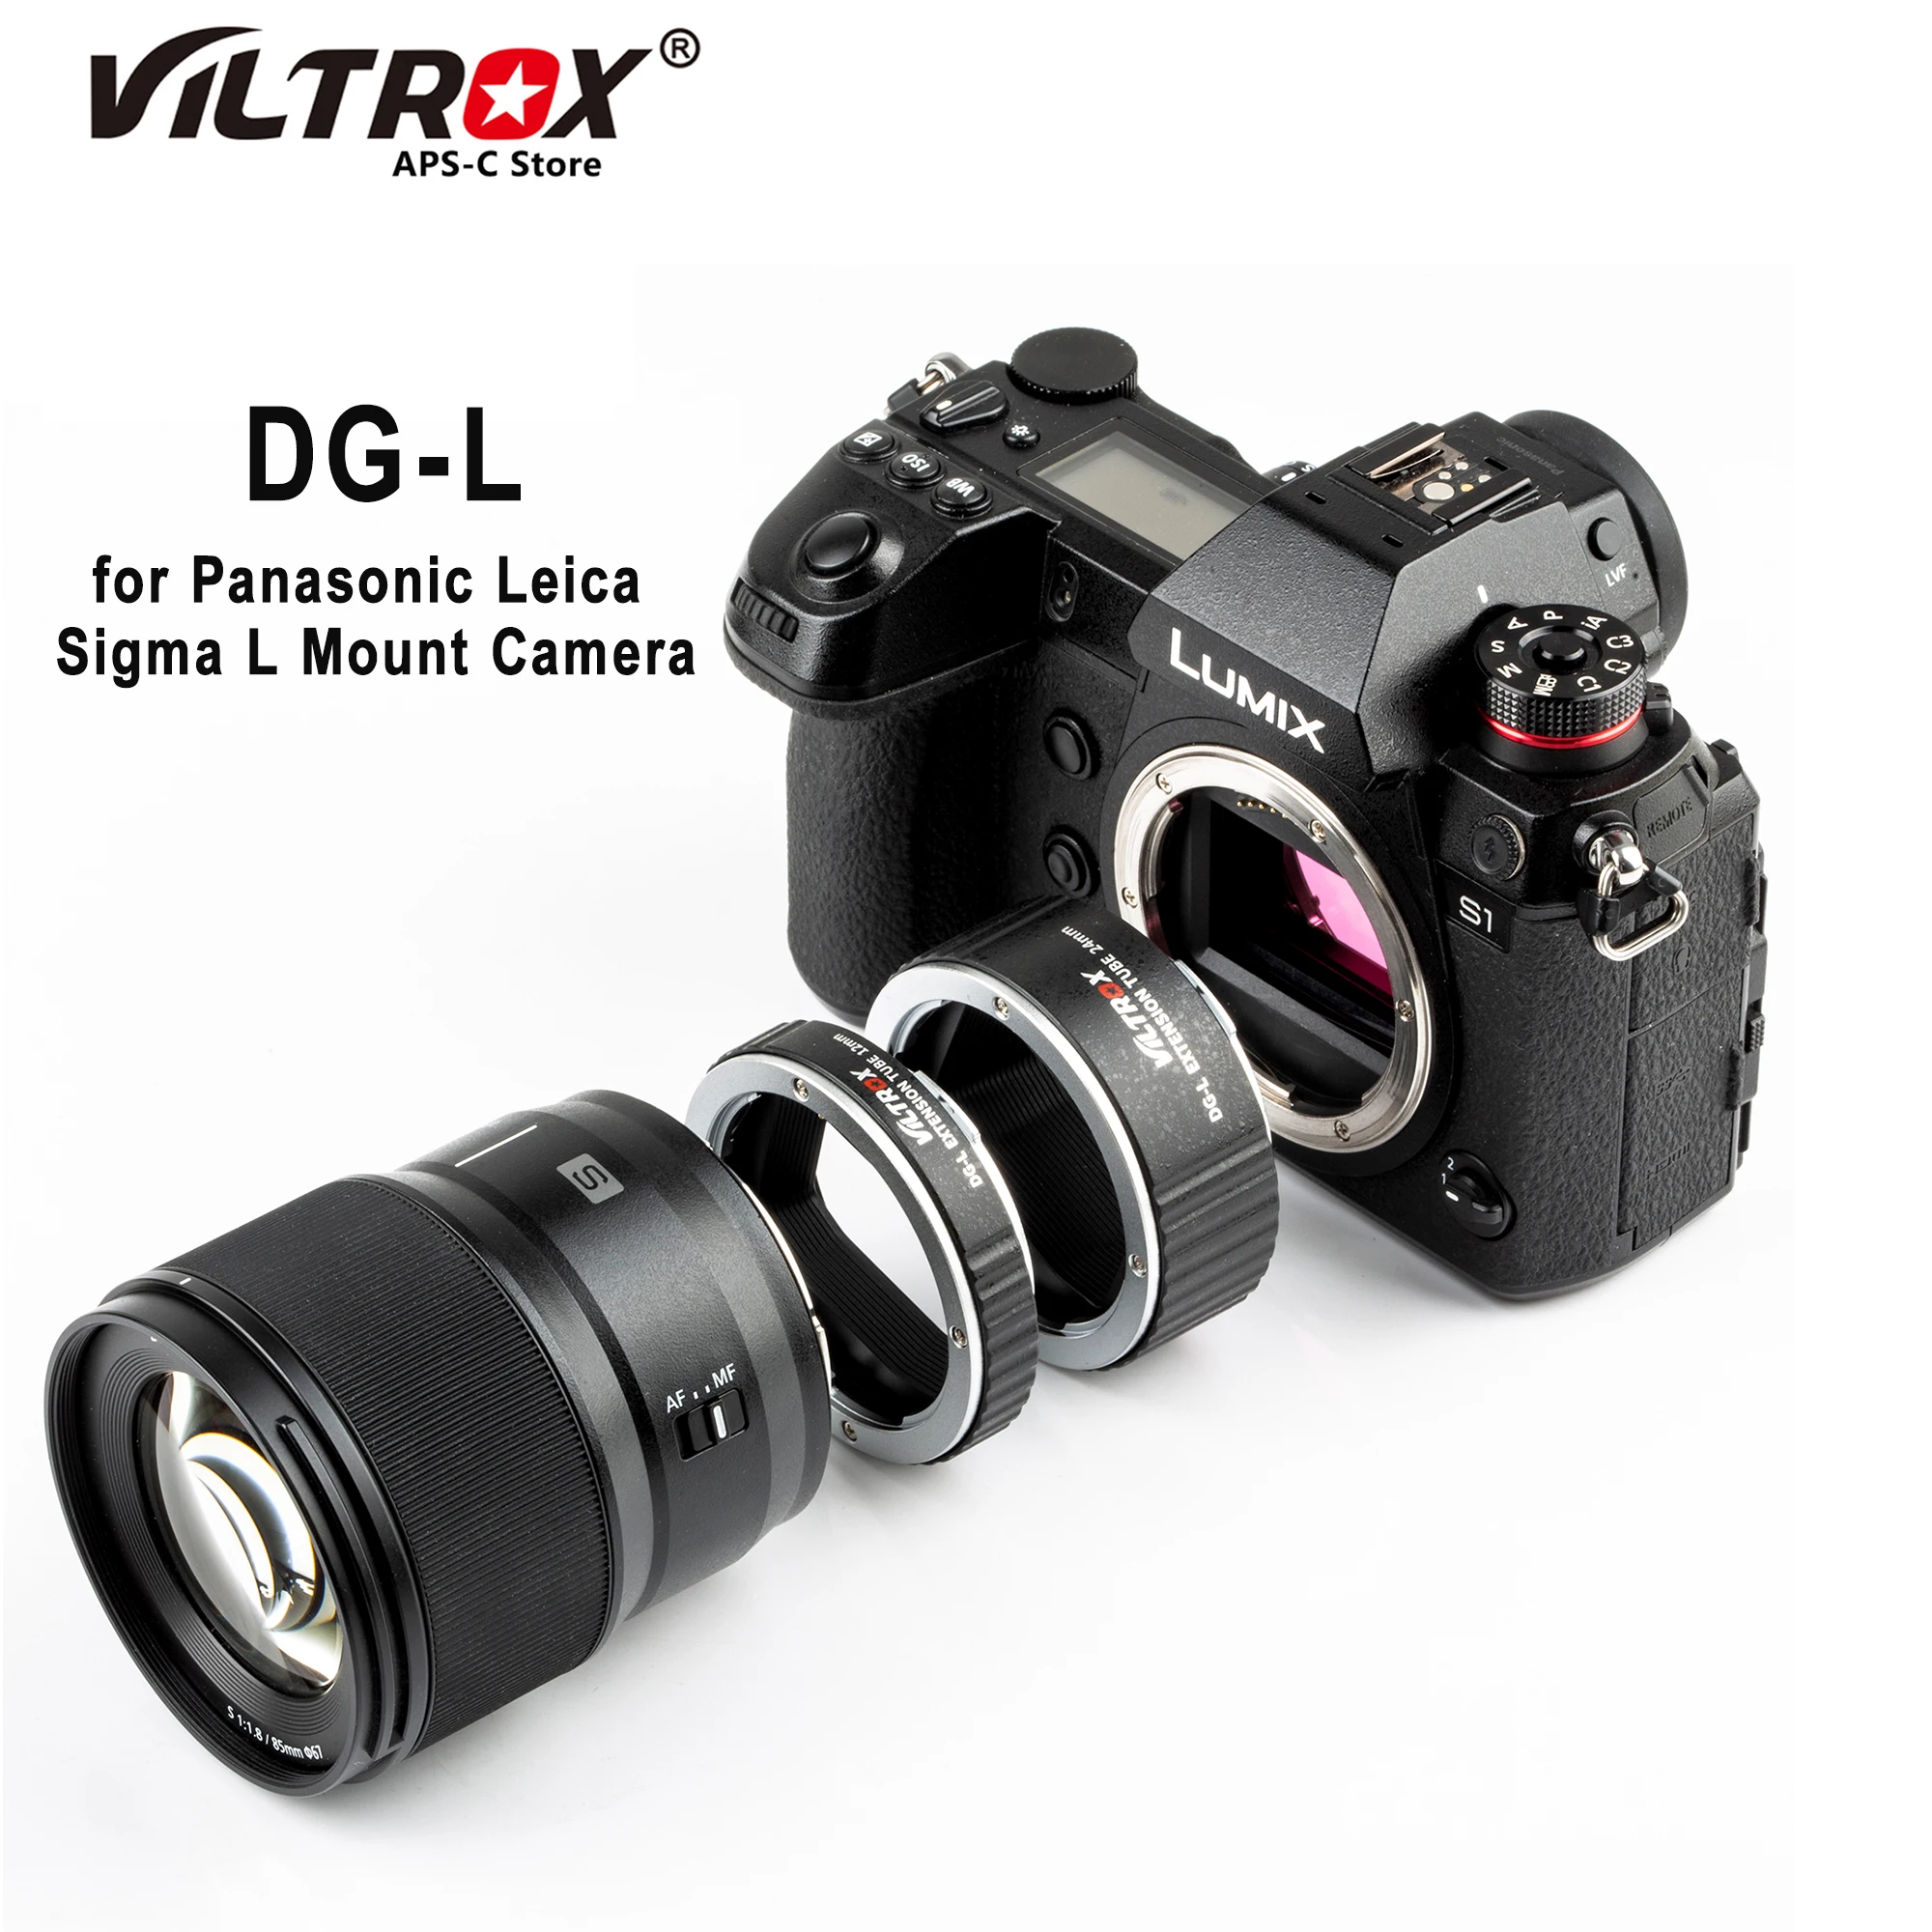 Viltrox DG-L Auto Focus AF Macro Extension Tube Lens Adapter Ring 12MM 24MM Electronic for Panasonic Leica Sigma L Mount Camera